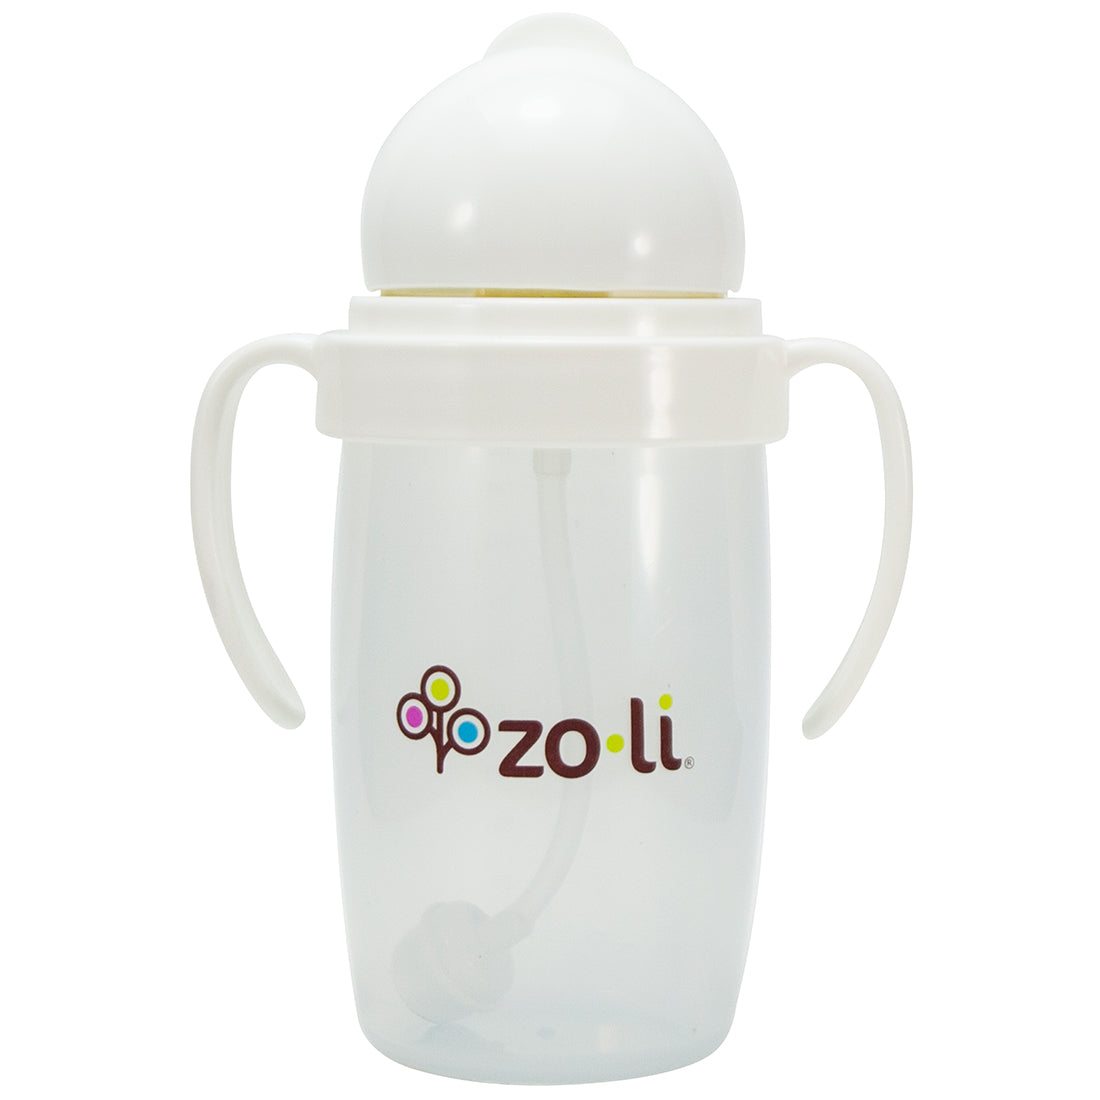 Any angle straw sippy cup  ZoLi BOT 2.0 weighted straw sippy spruce green  most loved training sippy cup toddler transition straw cup sippy cup with  handles